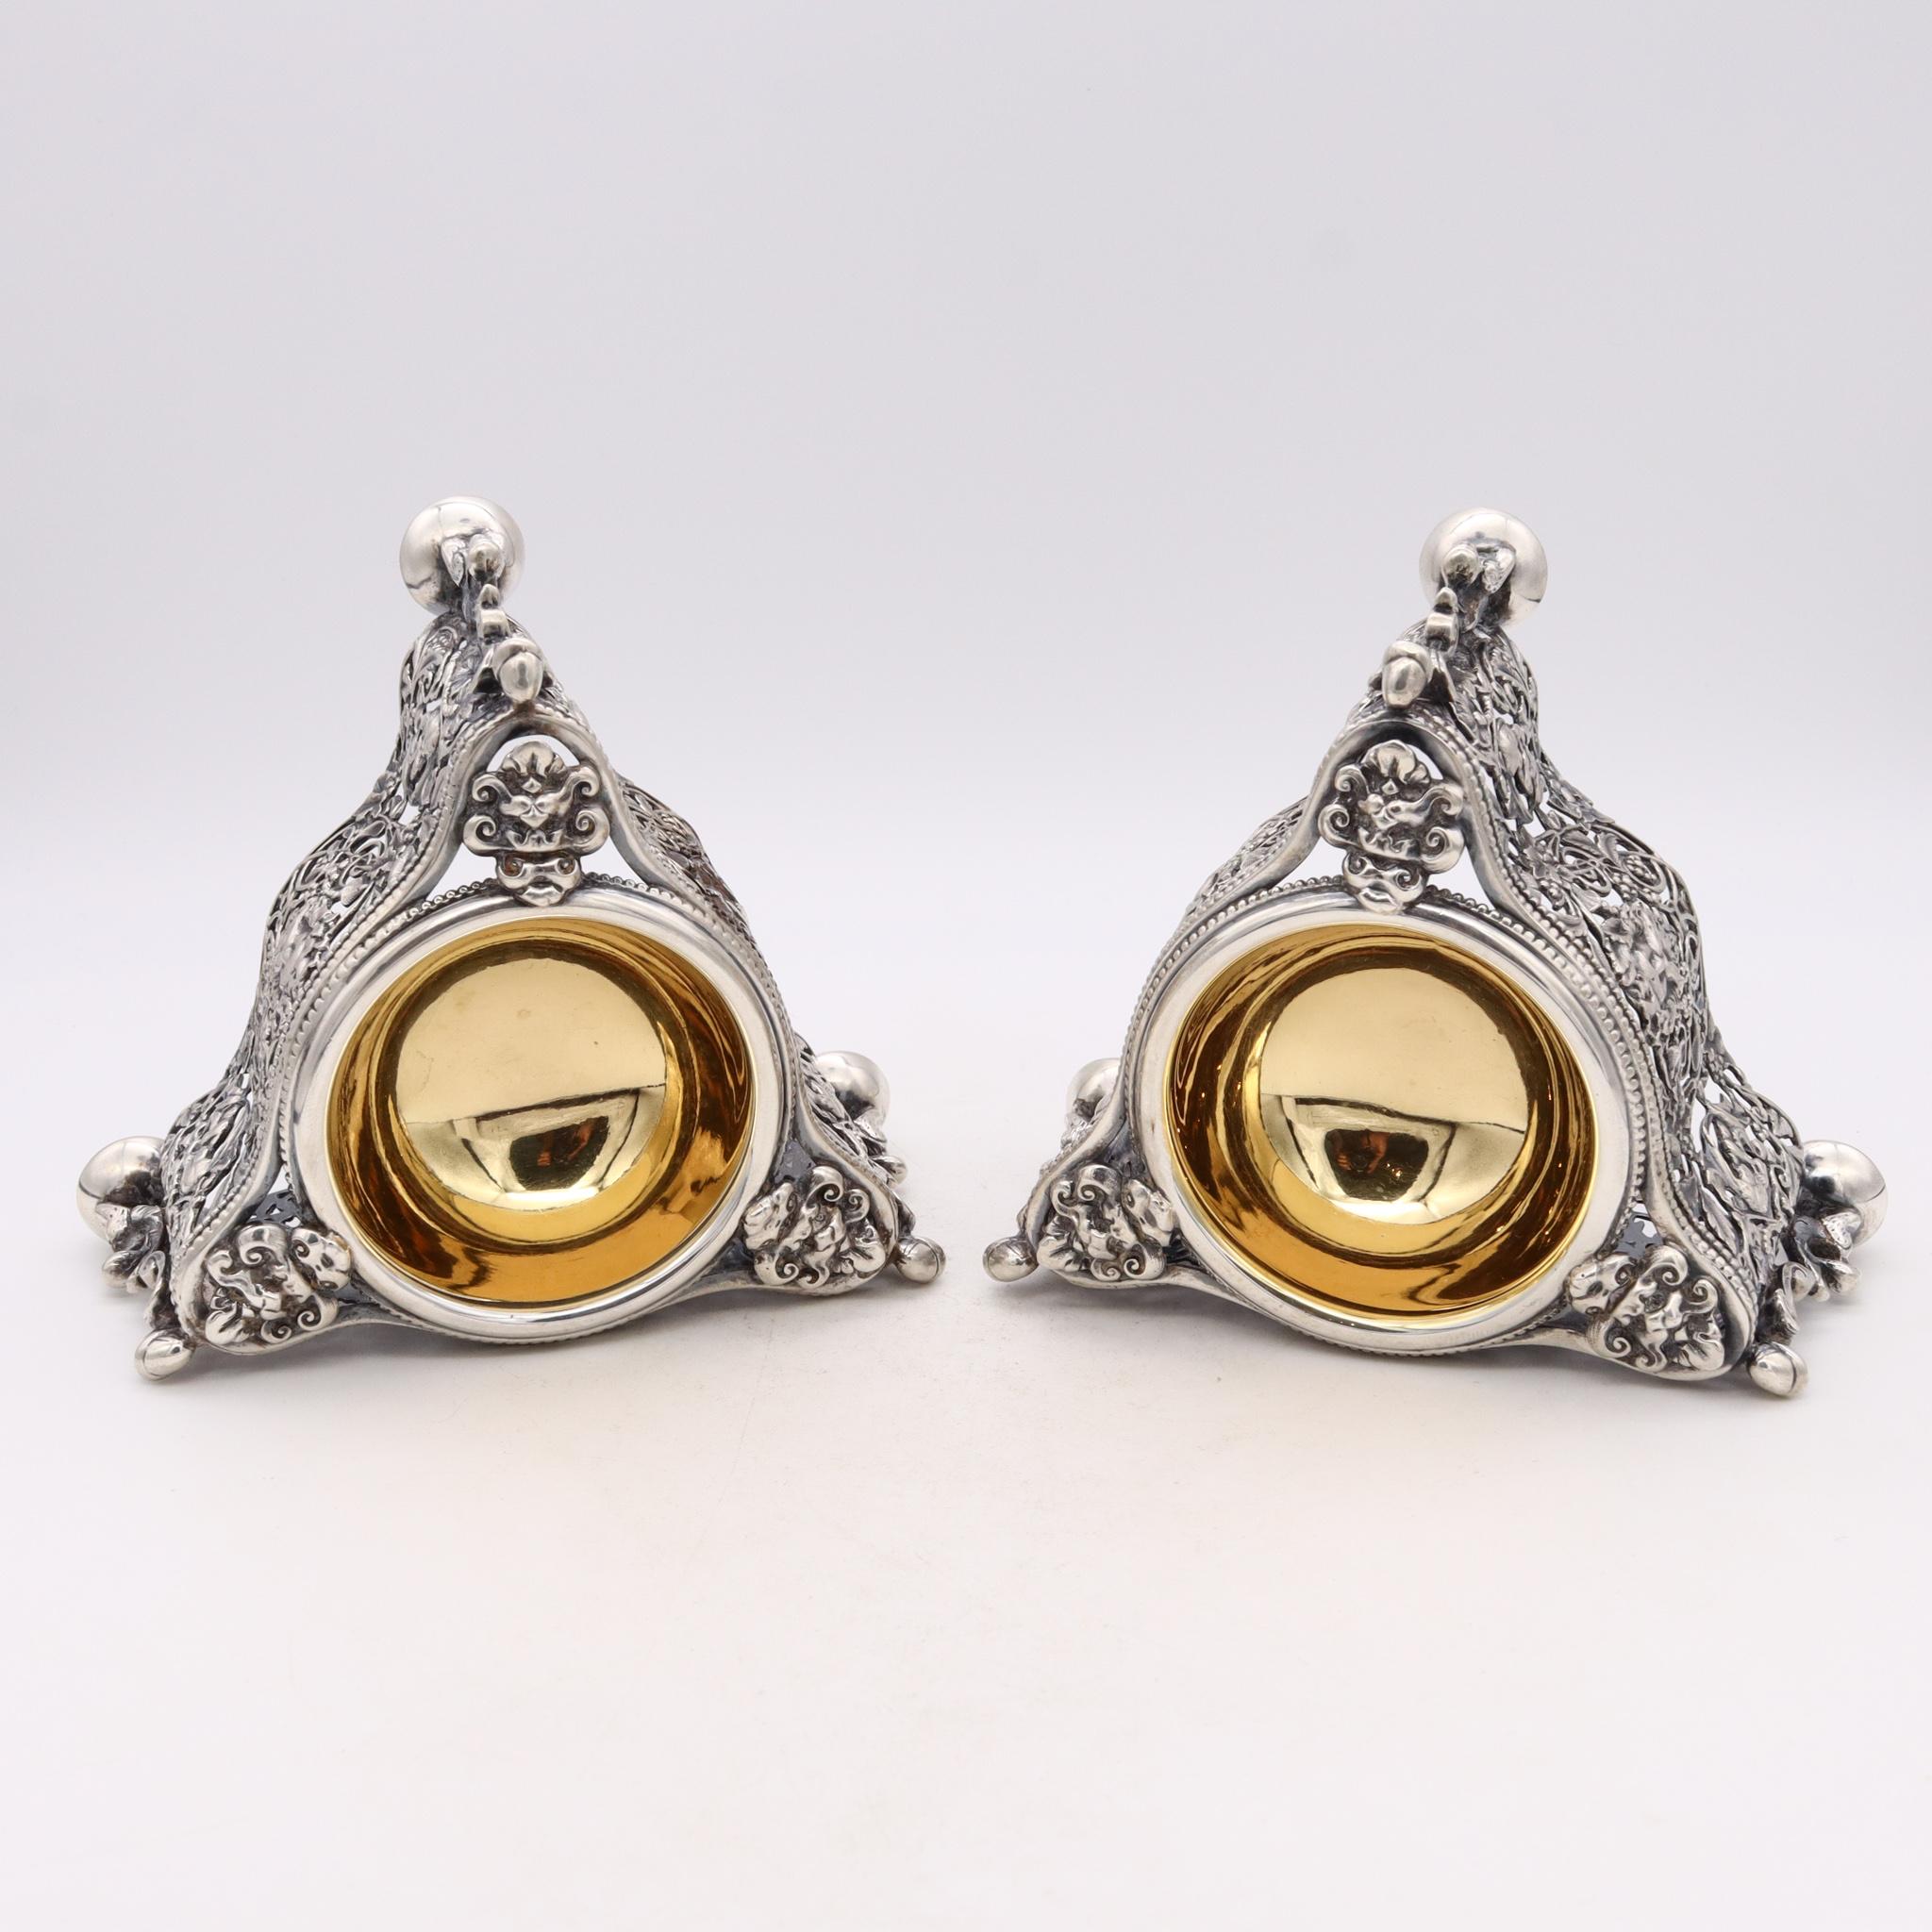 Germany 1870 Important Pair of Neoclassical Salt Species Cellars in 24kt Gilt For Sale 1